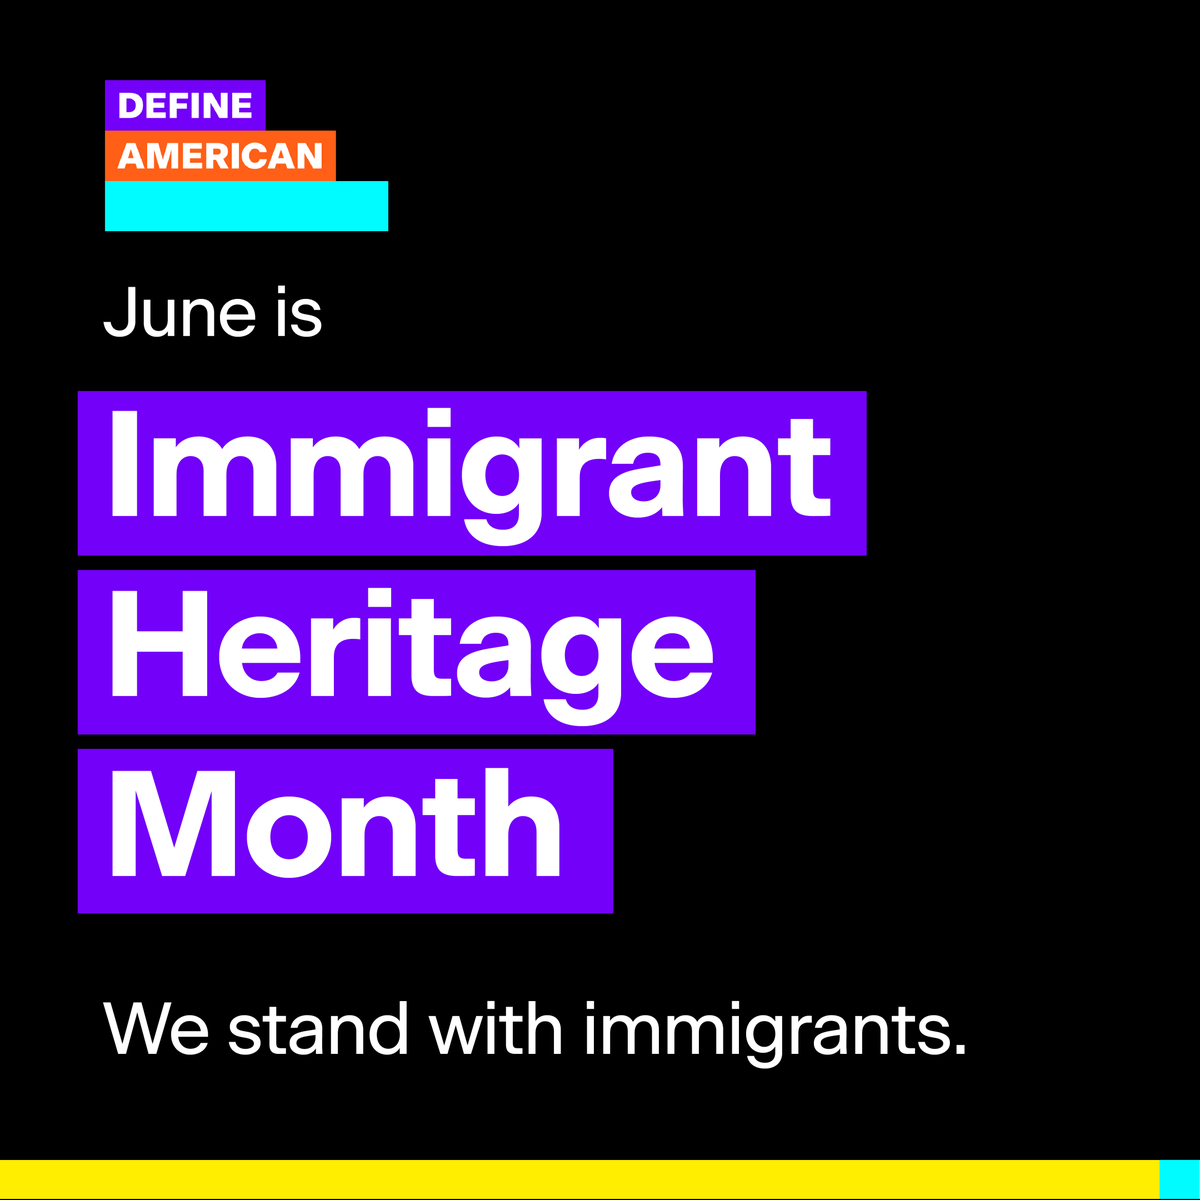 Today, we kick off the 10th annual #ImmigrantHeritageMonth! 🔥 

Immigrants have made and continue to make countless contributions to communities across the U.S. 

Show your support by using #IStandWithImmigrants to share stories on what it means to be an immigrant or an ally.